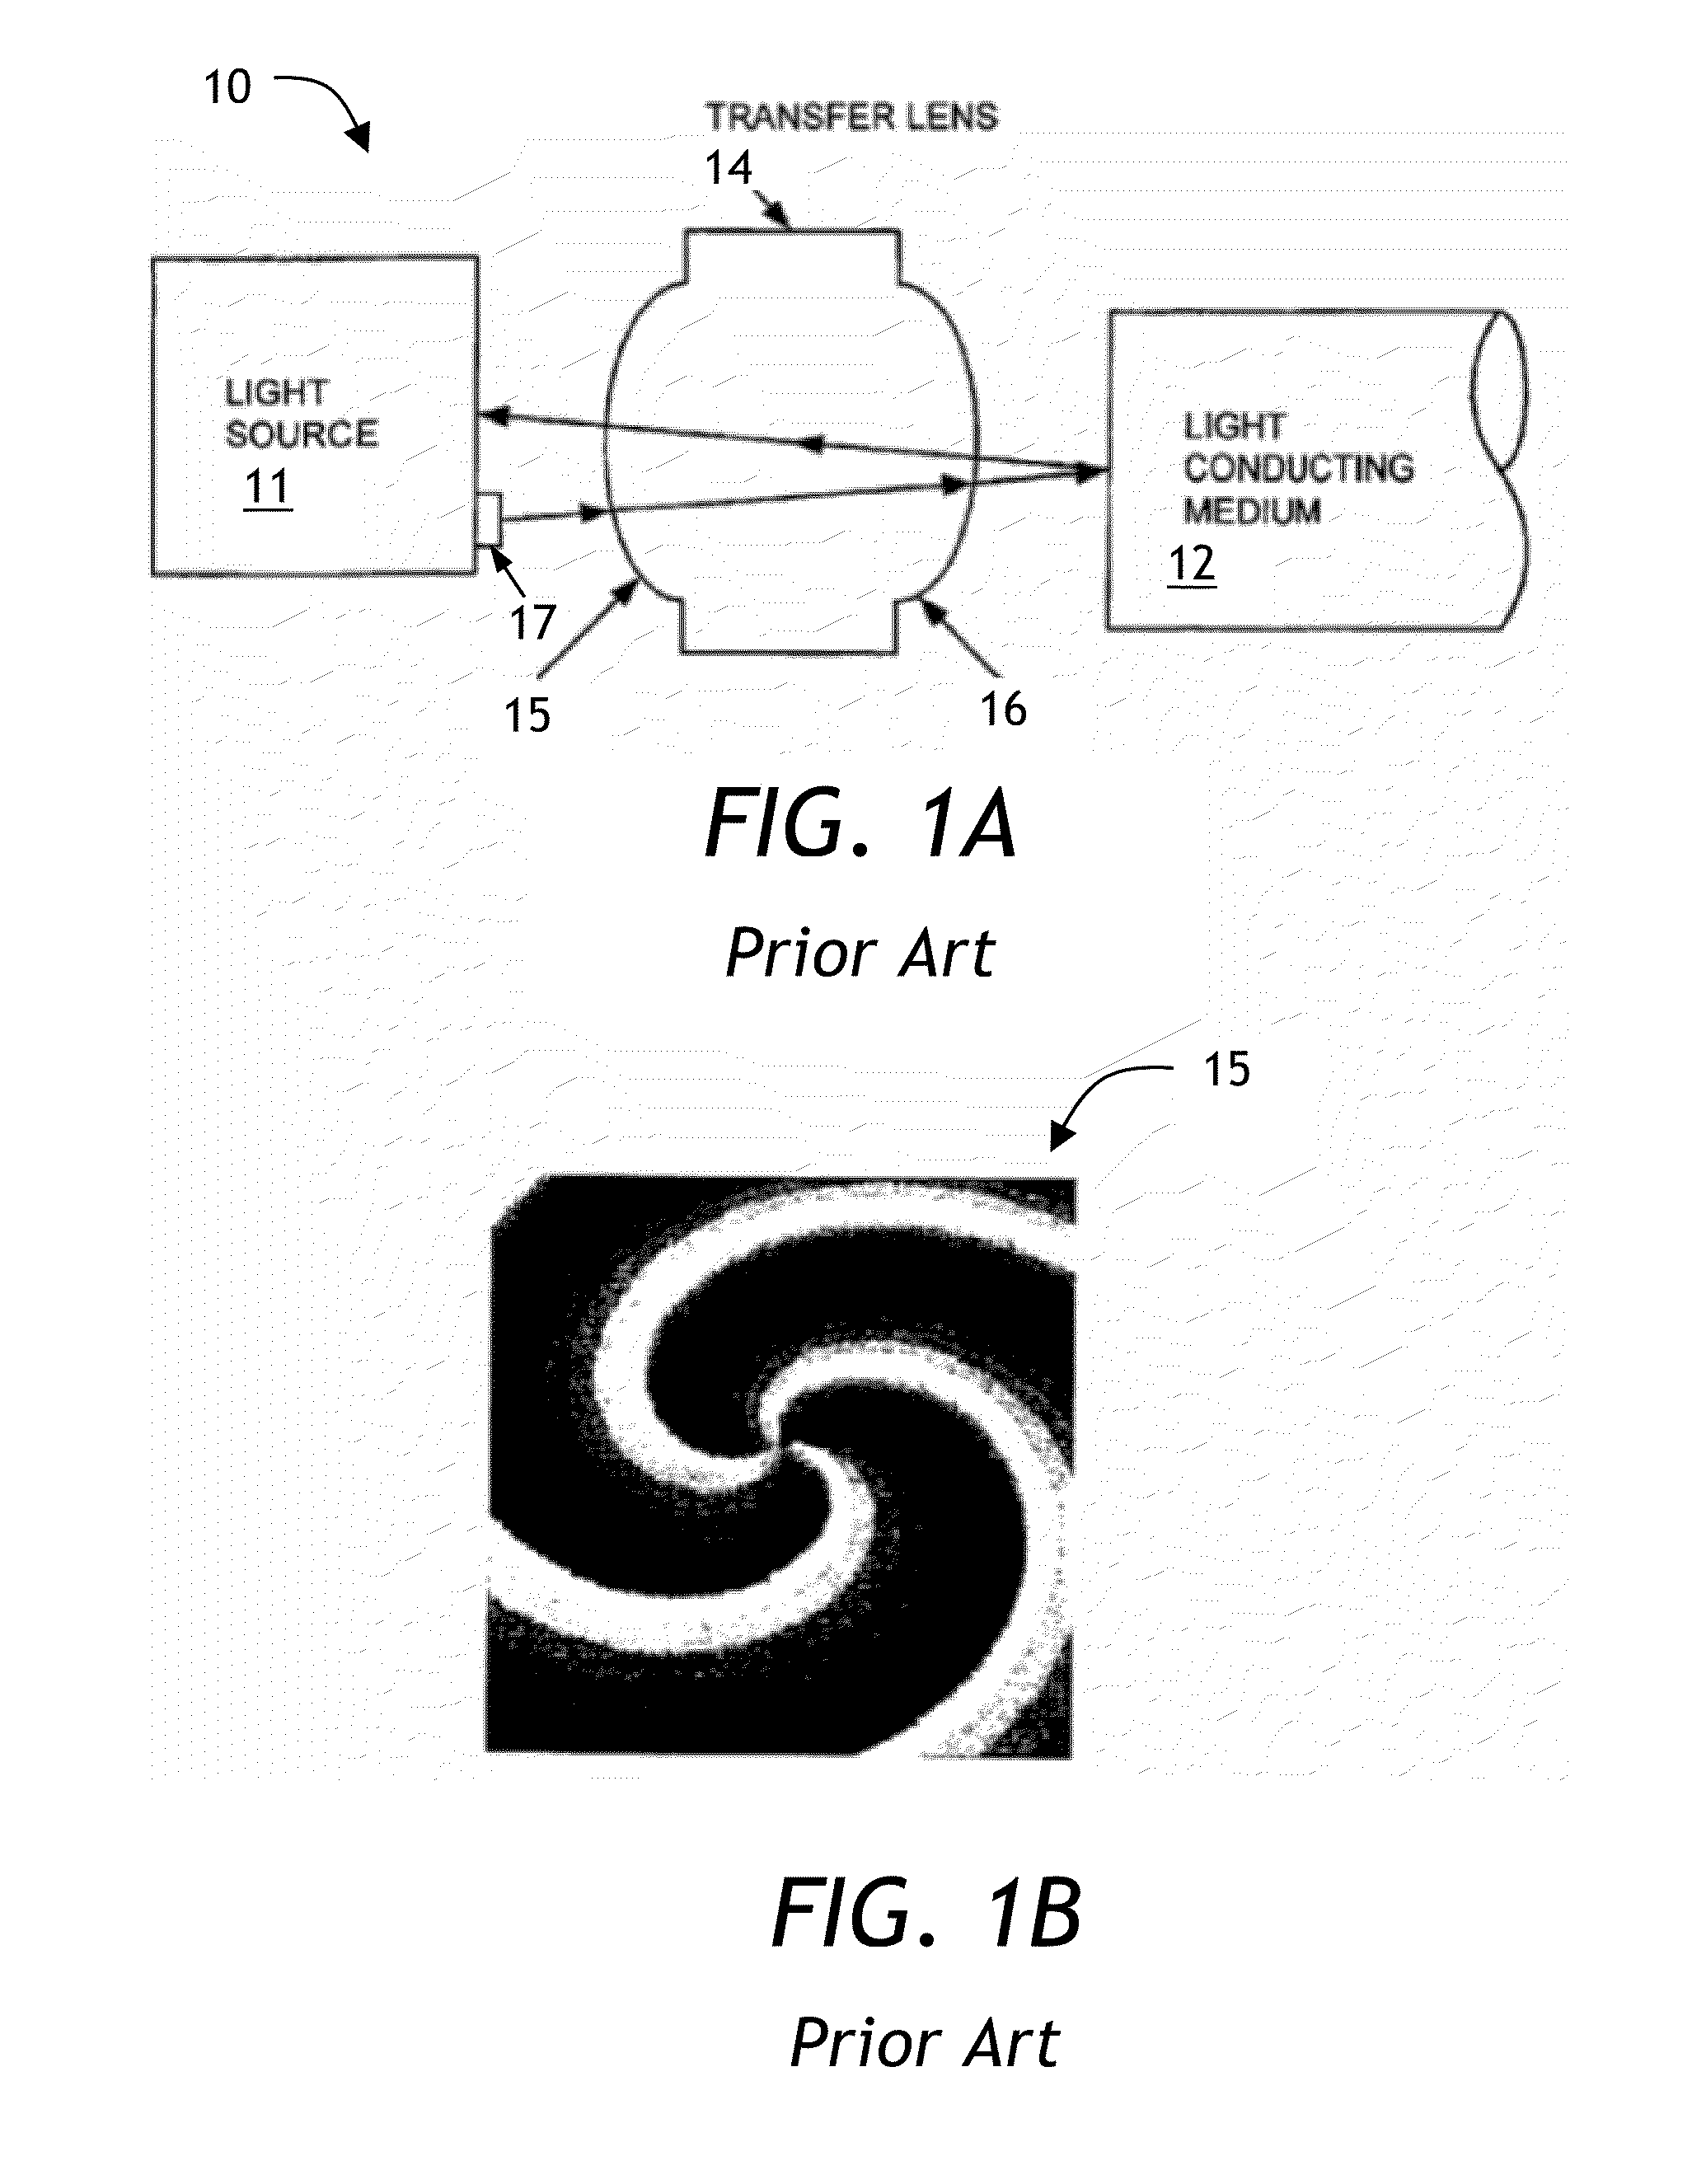 Optical subassembly for coupling light into an optical waveguide